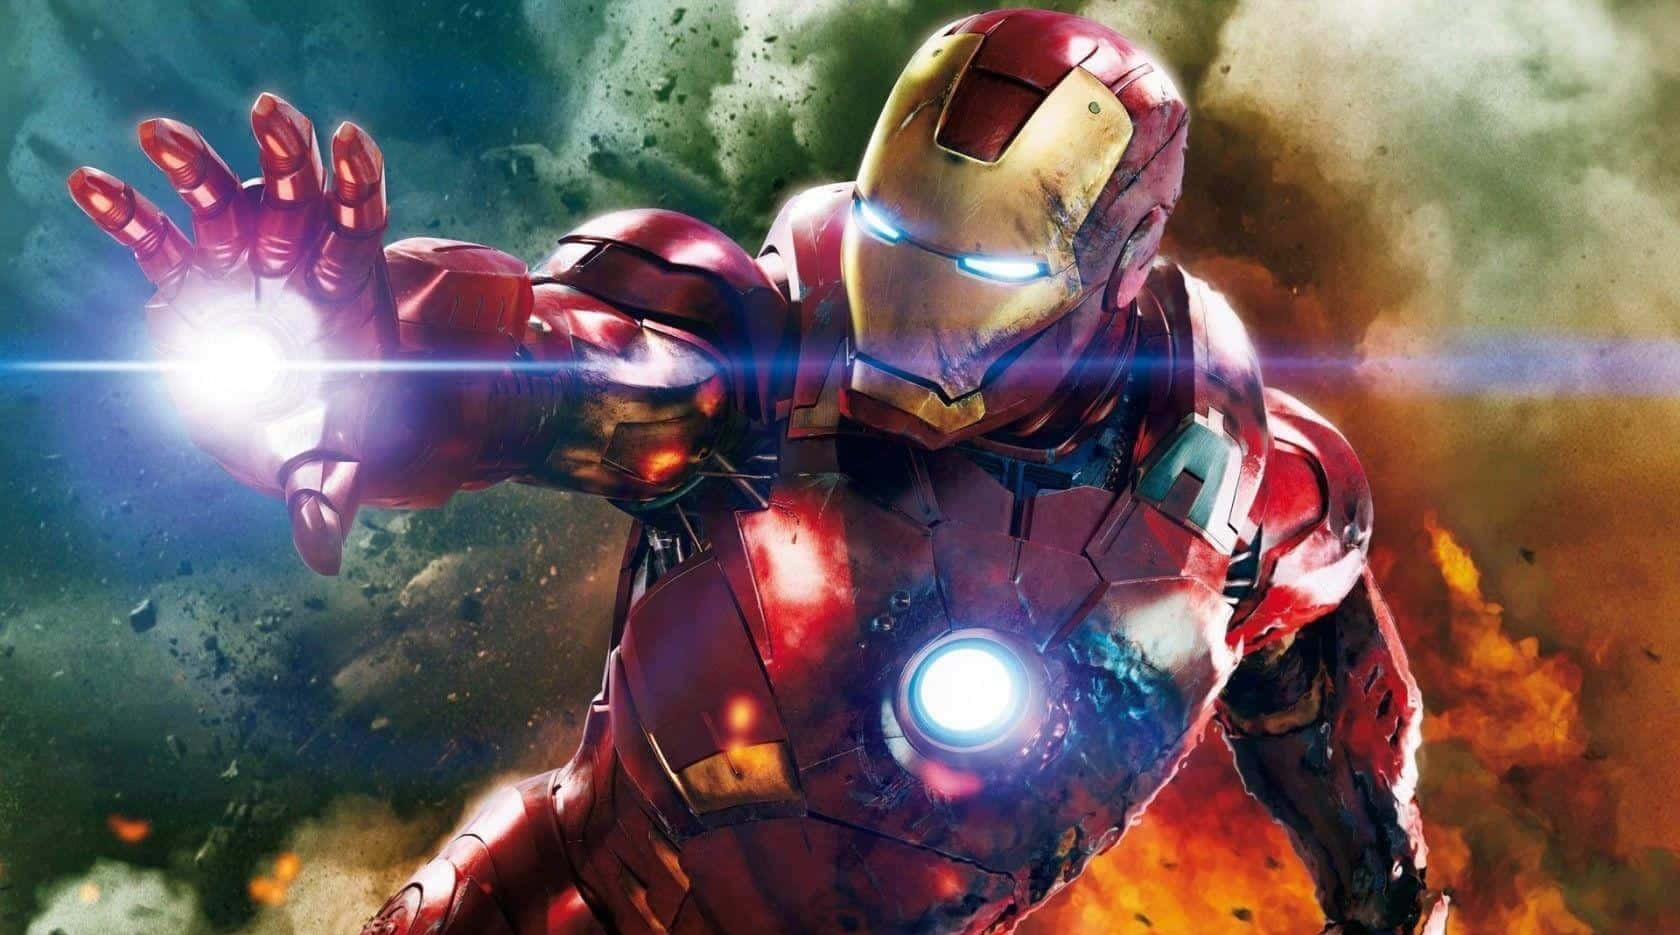 Iron Man 3 Brings Tony Stark's Revolutionary Suit Of Armor To The Big Screen. Background